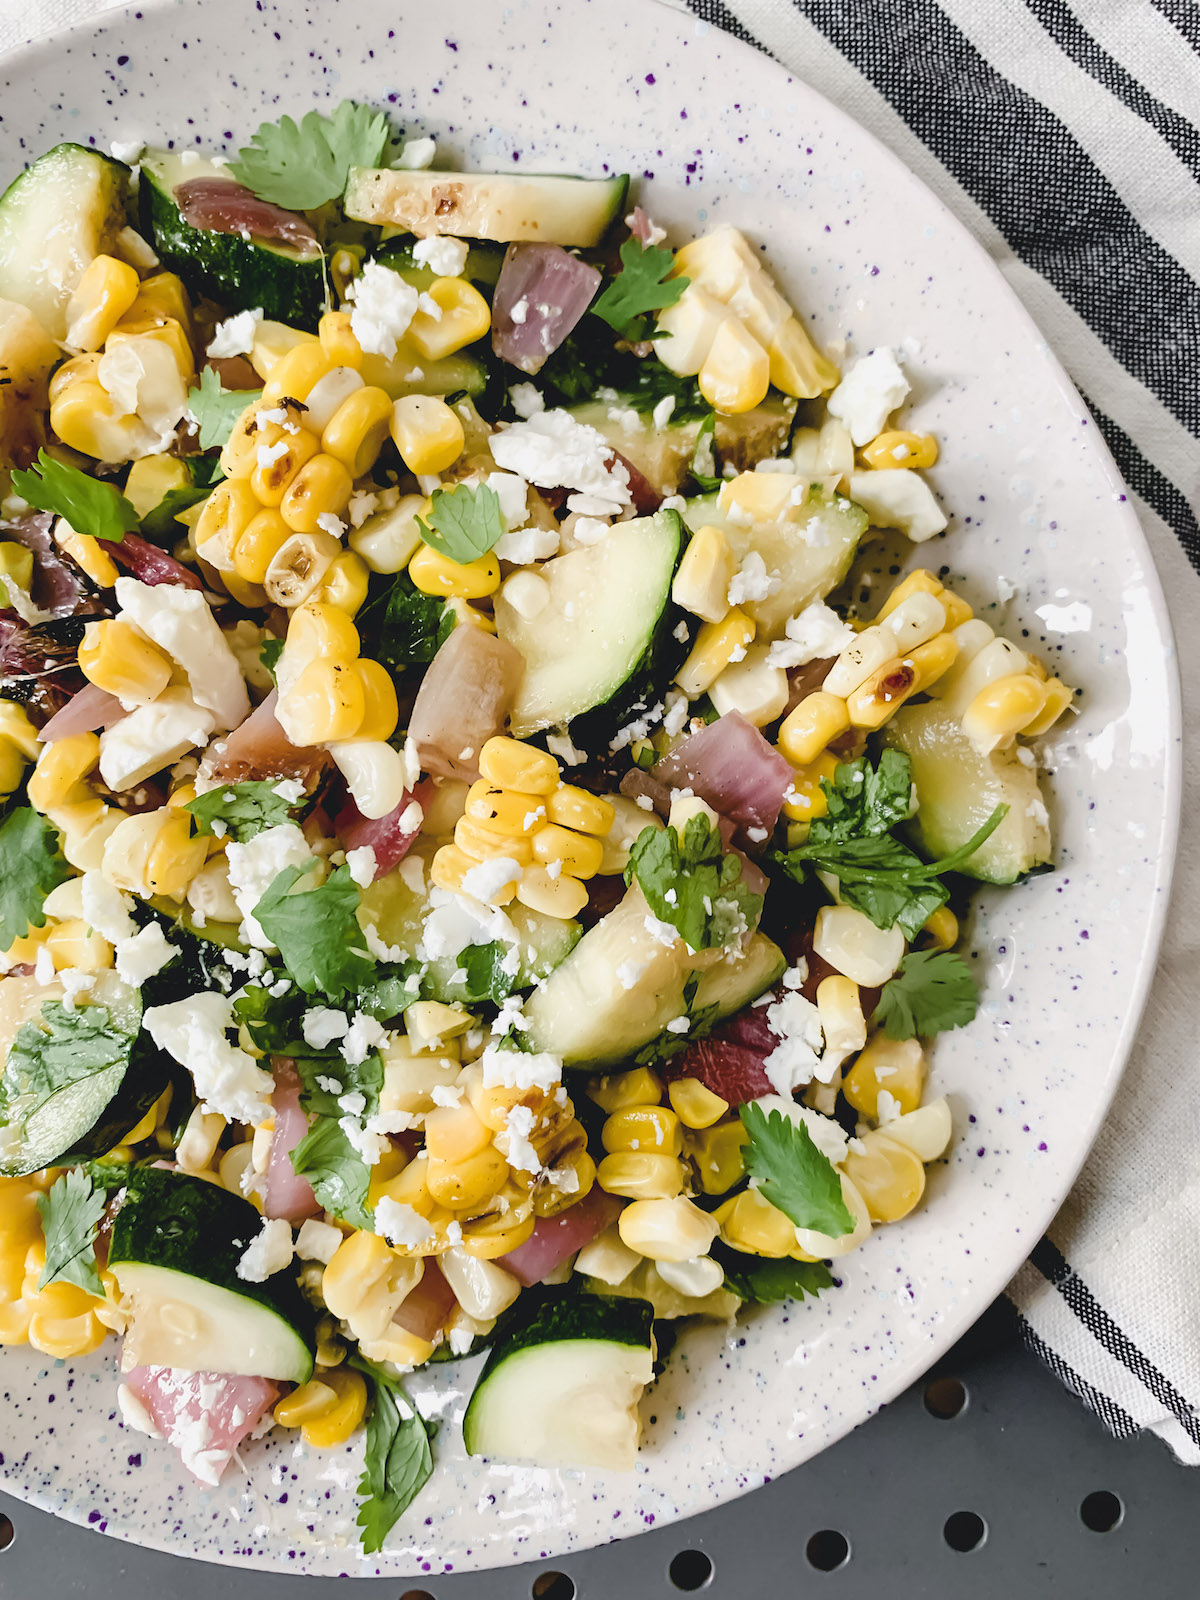 Grilled Corn and Zucchini salad in a speckled bowl with a navy and white striped napkin in the background